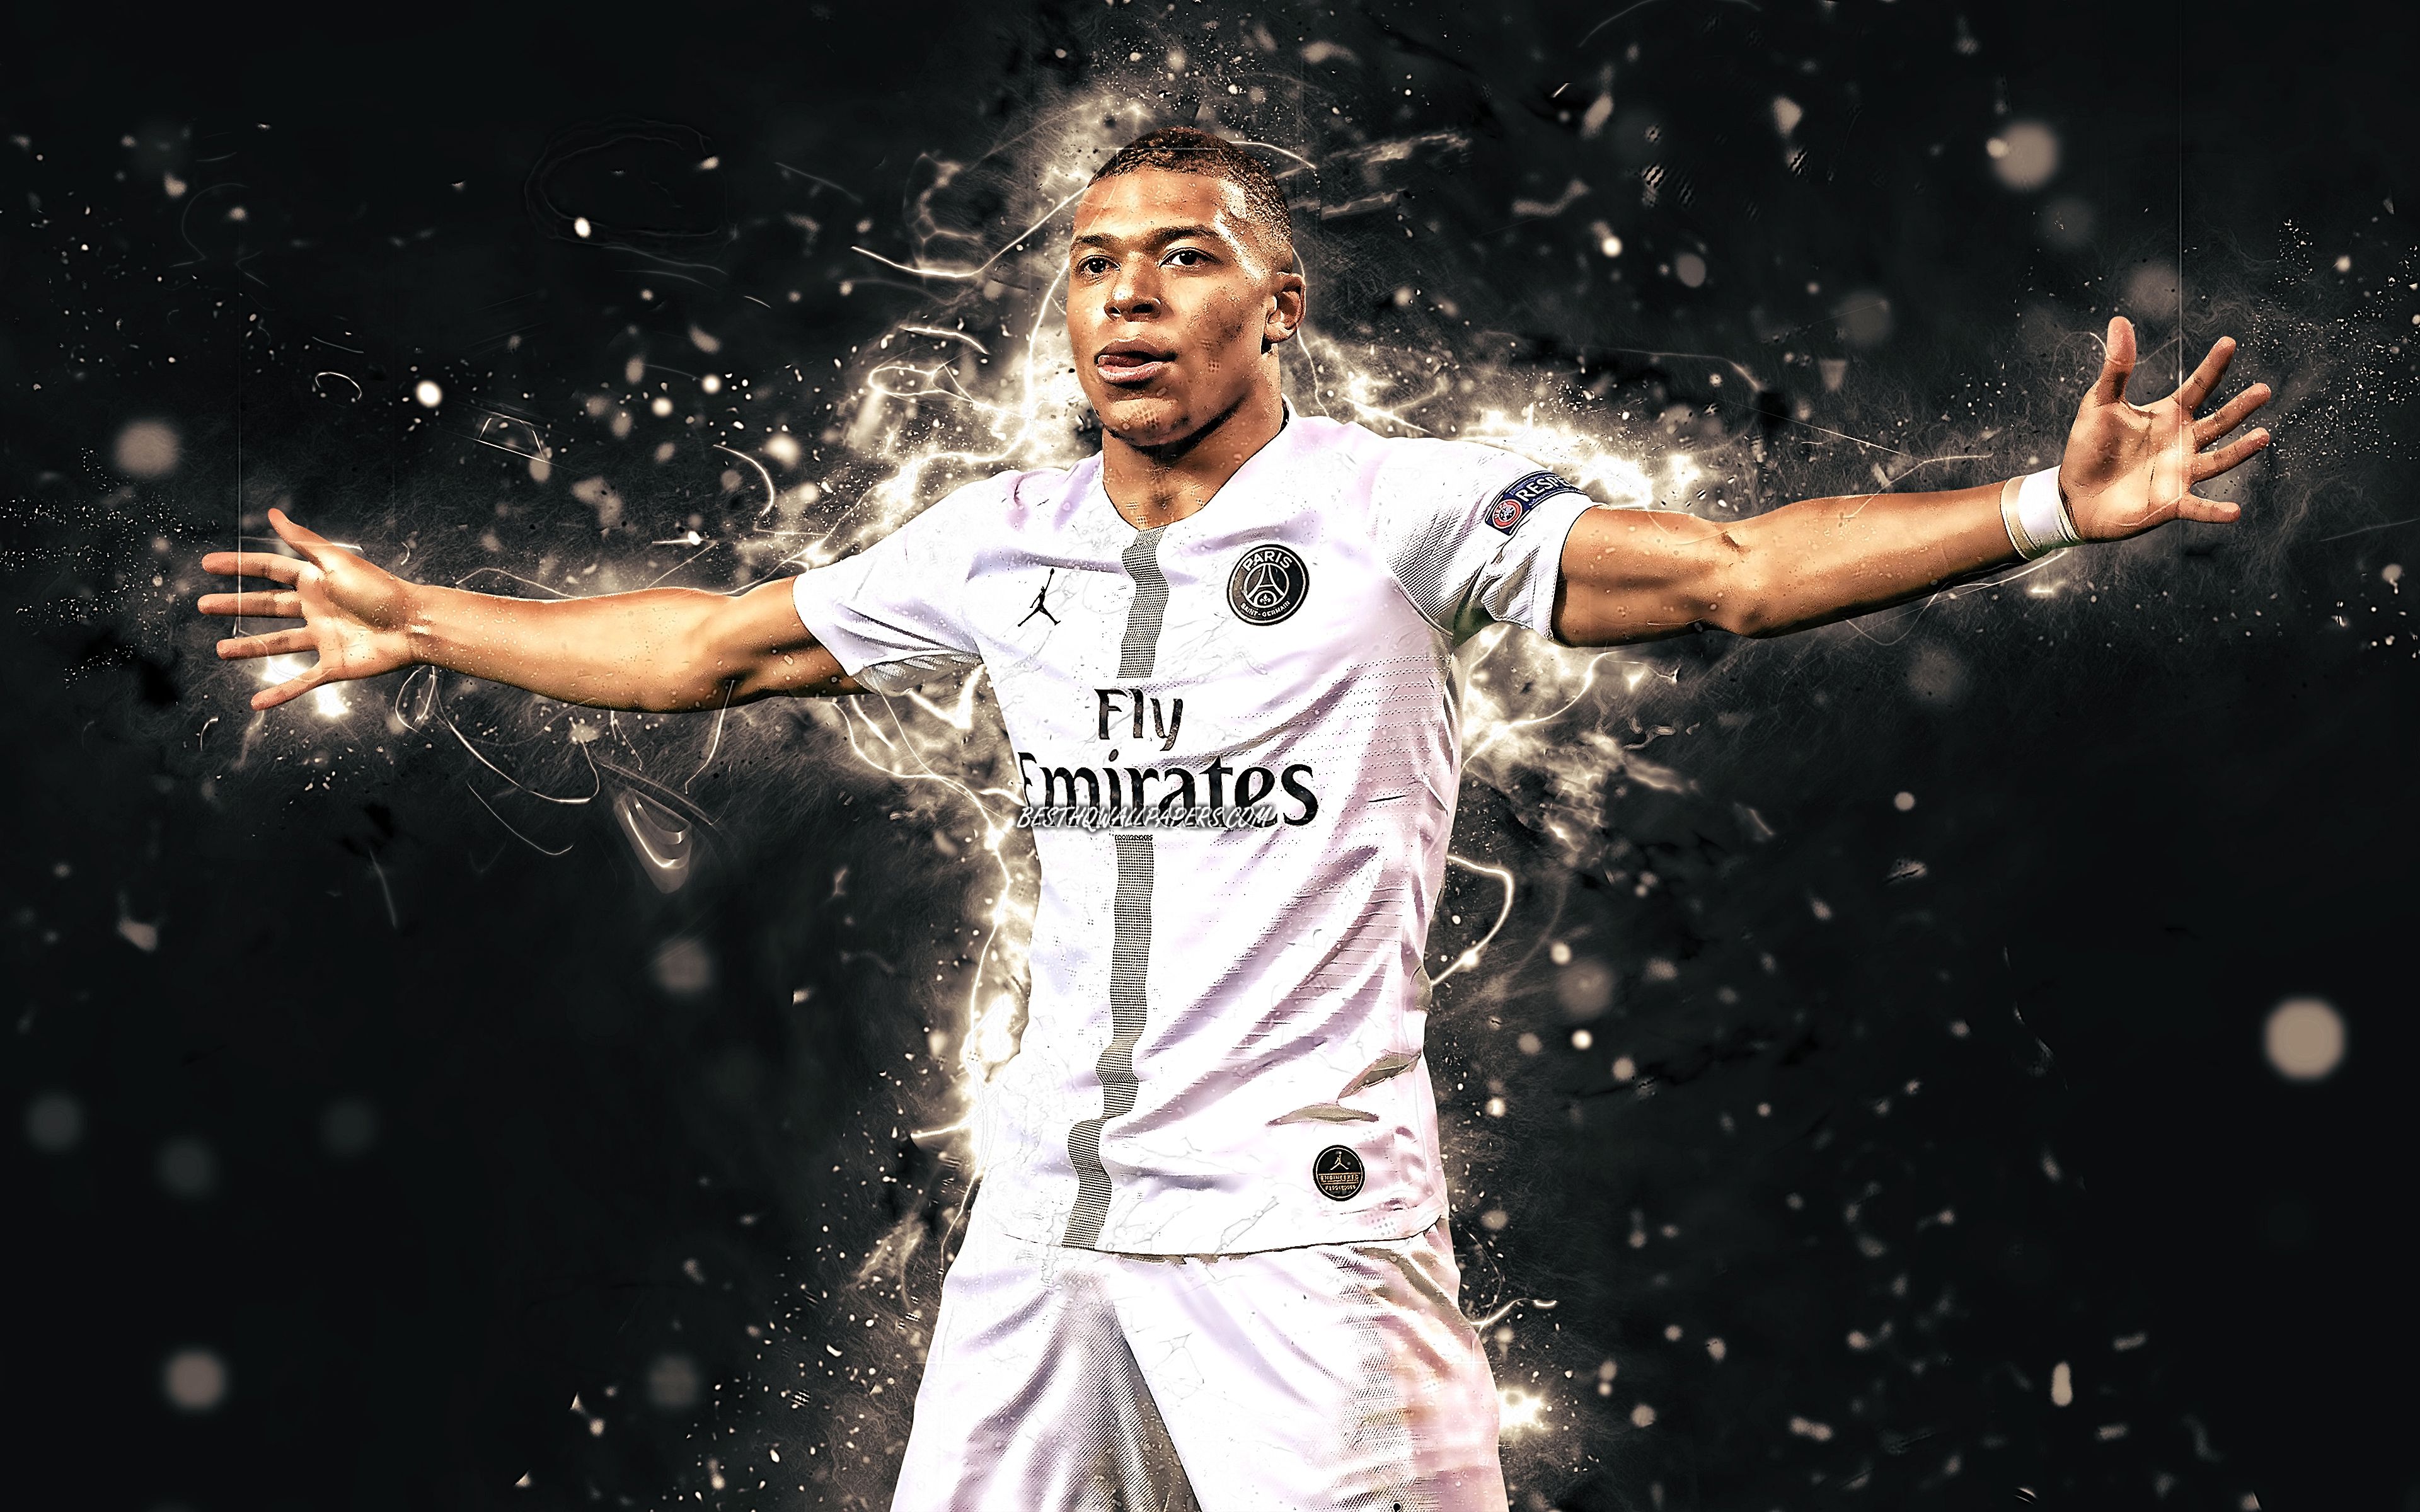 Mbappe Efootball 2022 - Management And Leadership